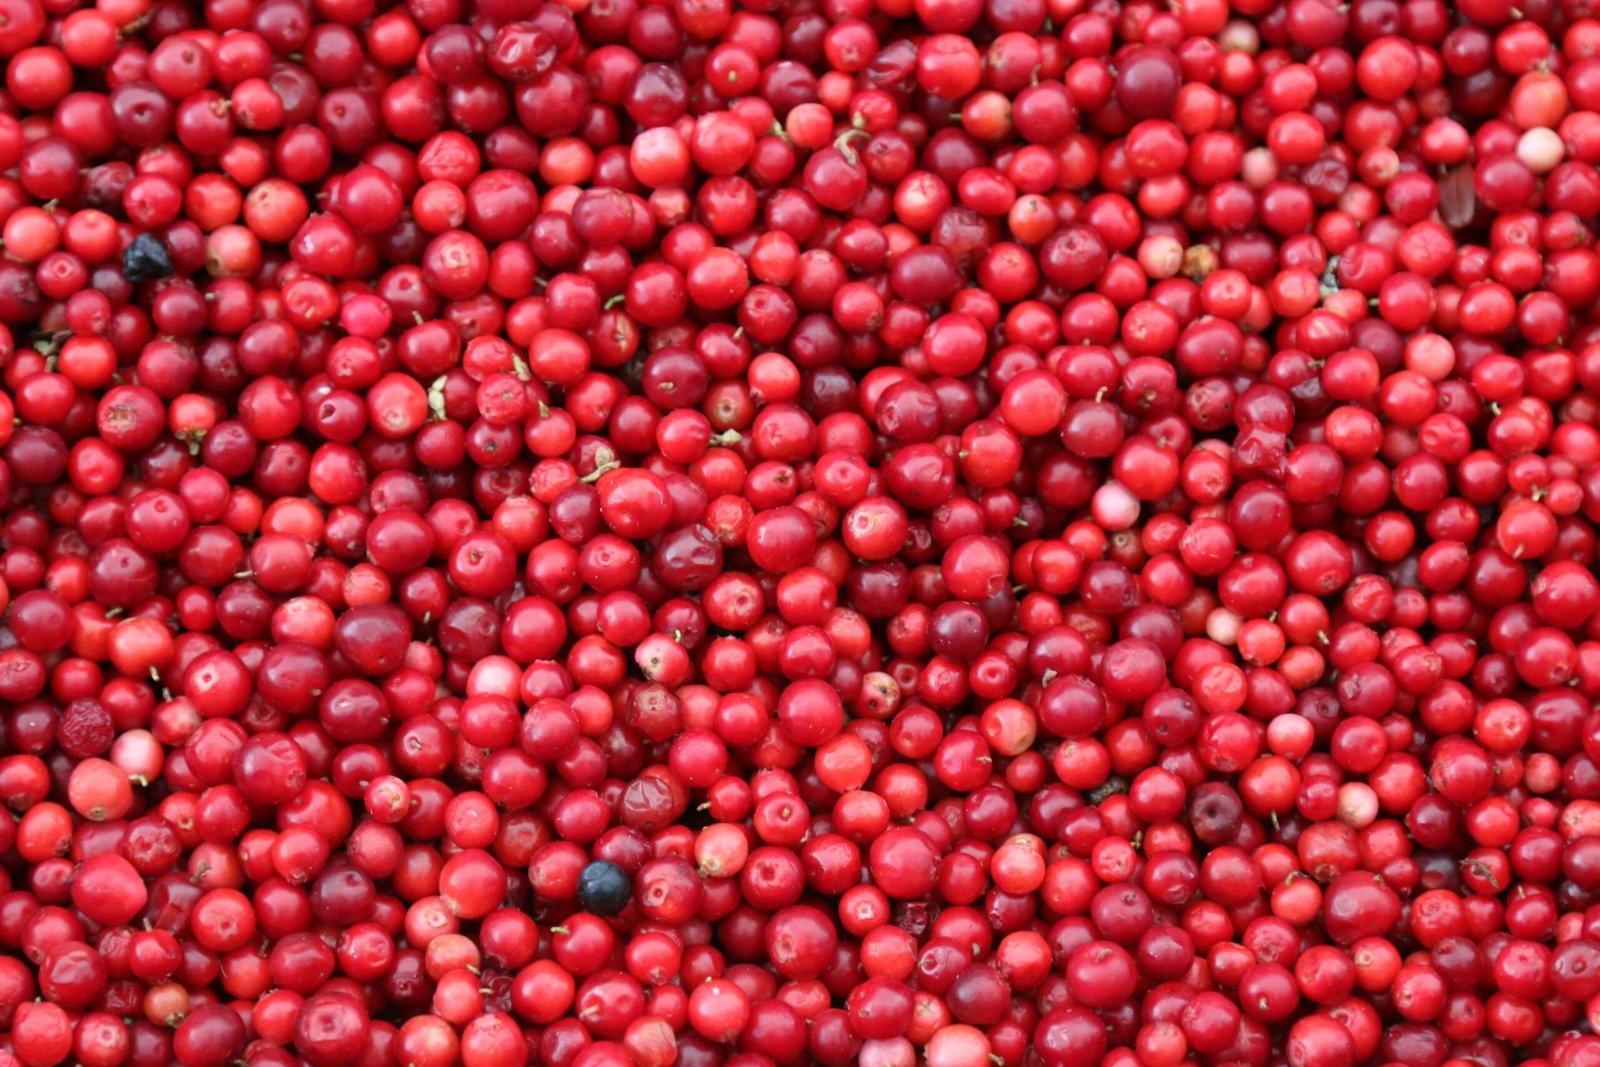 Cranberry Extract: Understanding Its Uses and Scientific Evidence